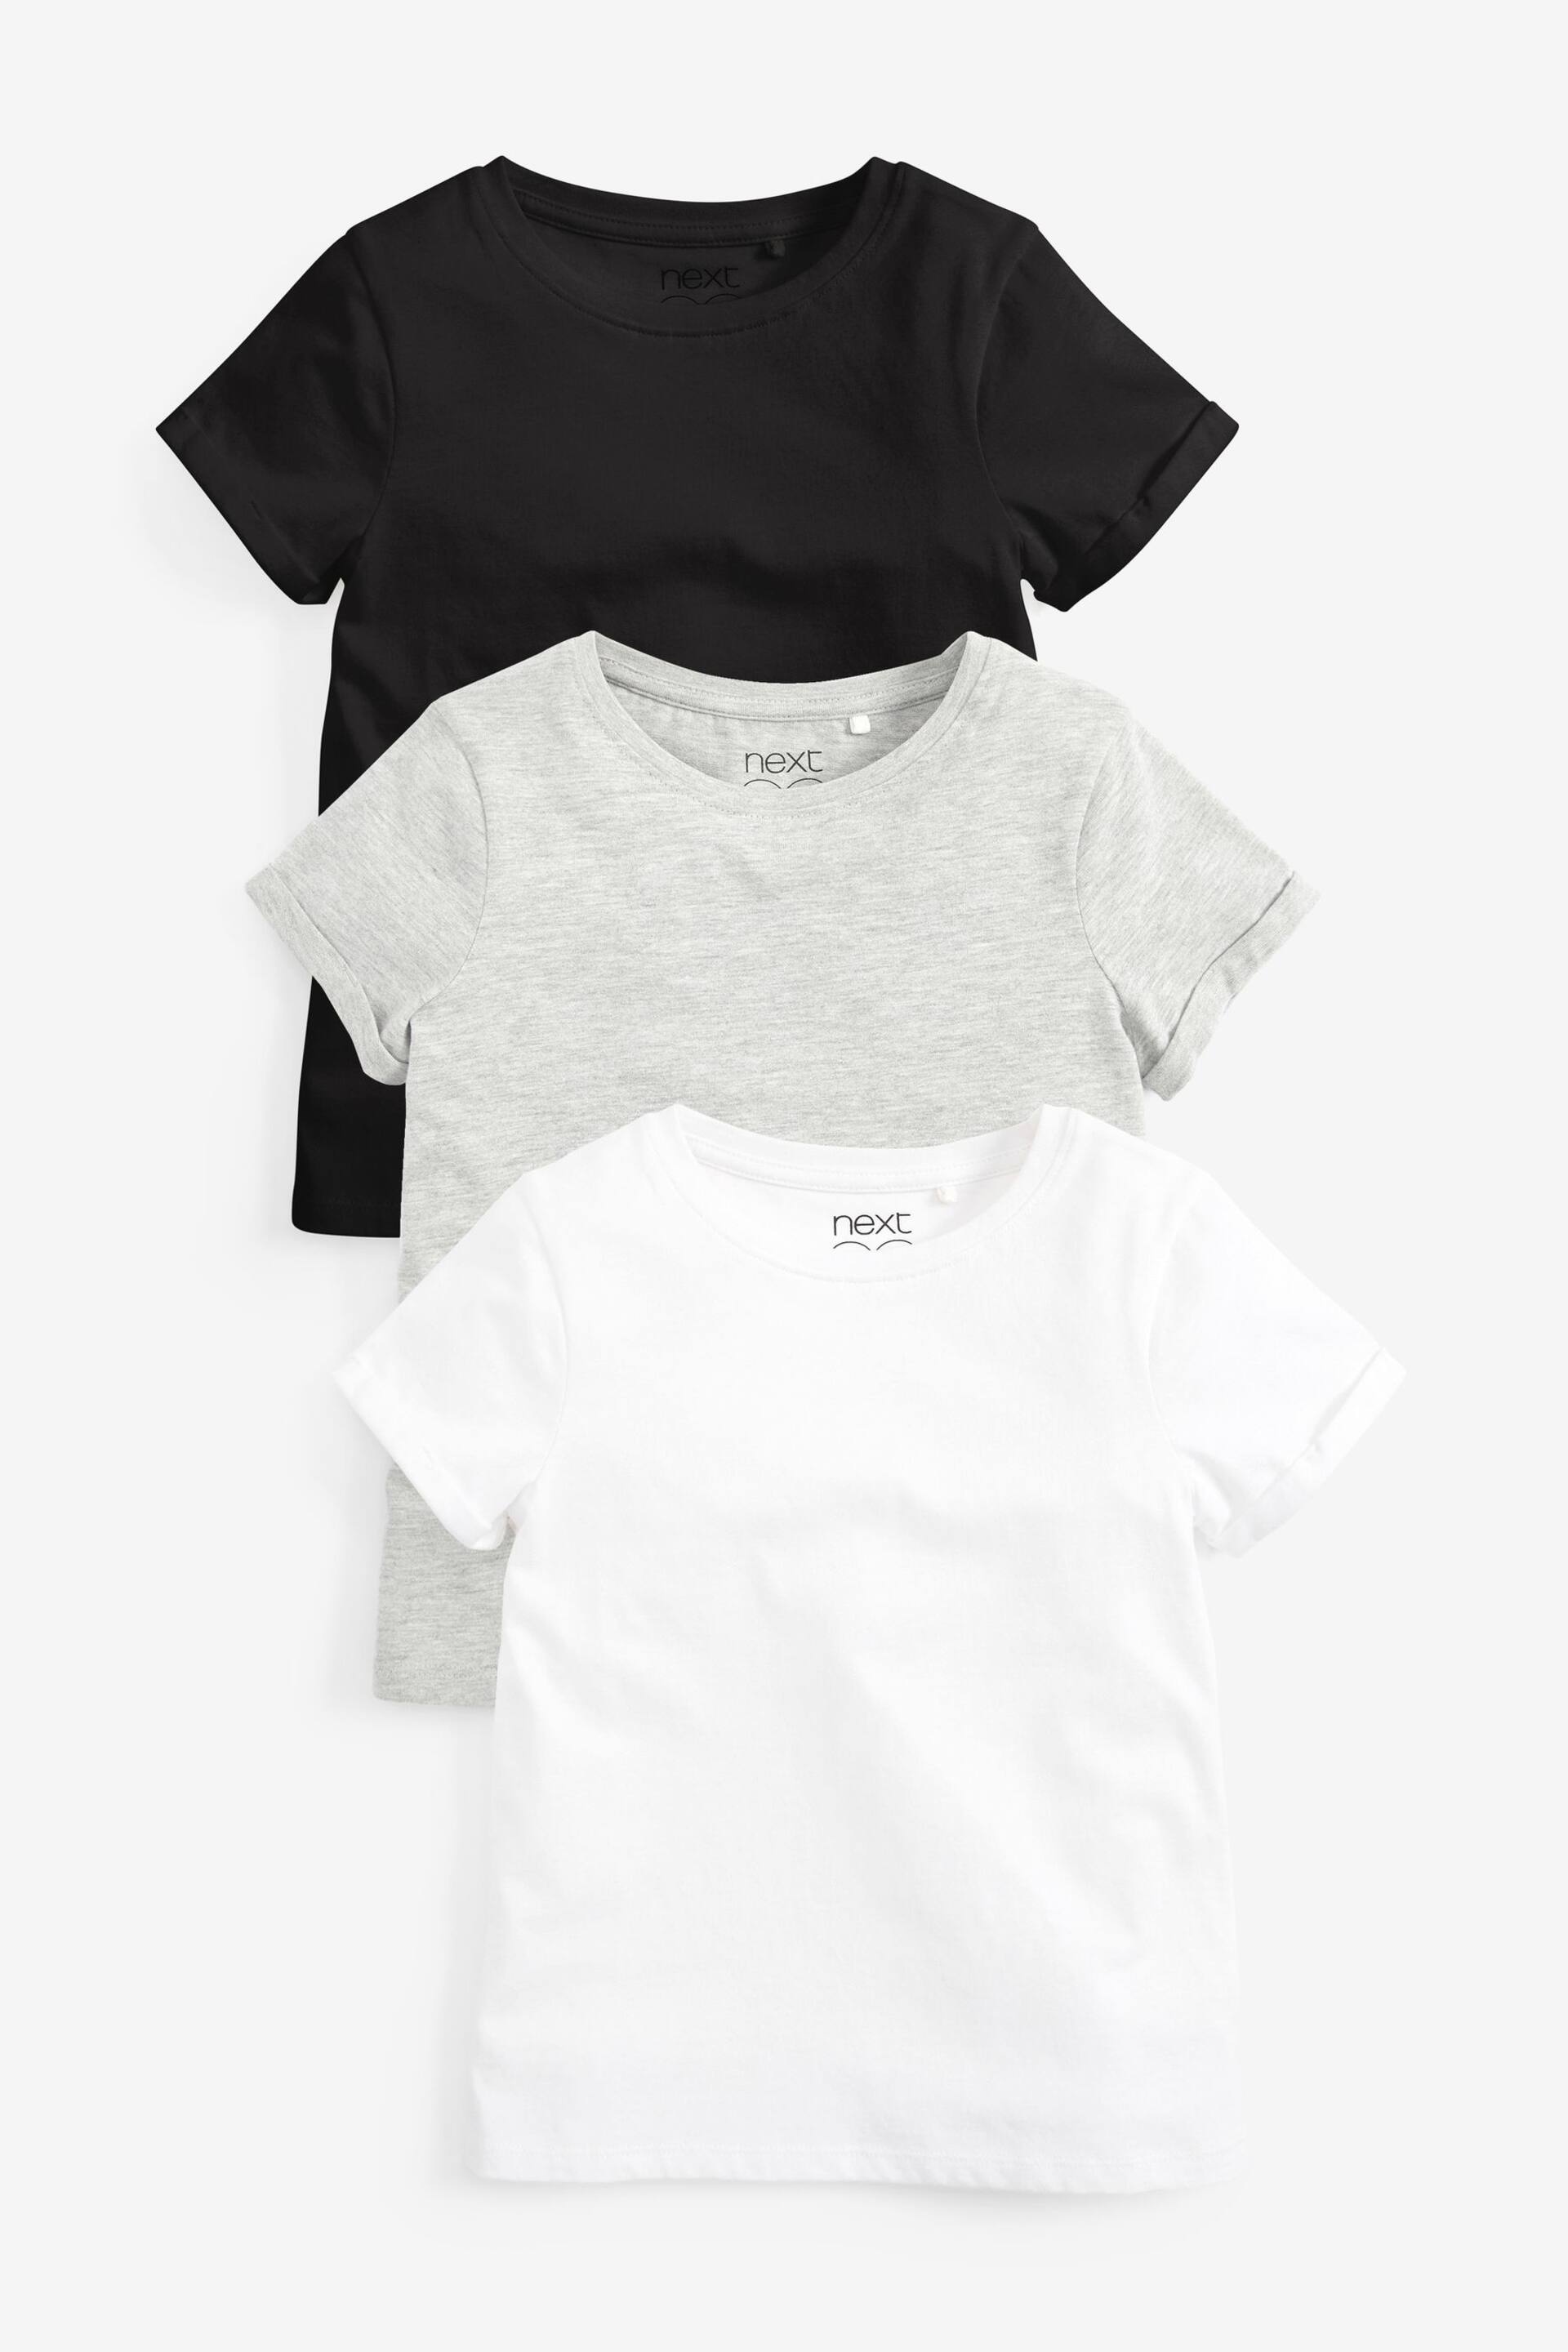 Black/White 3 Pack 3 Pack T-Shirts (3-16yrs) - Image 1 of 10